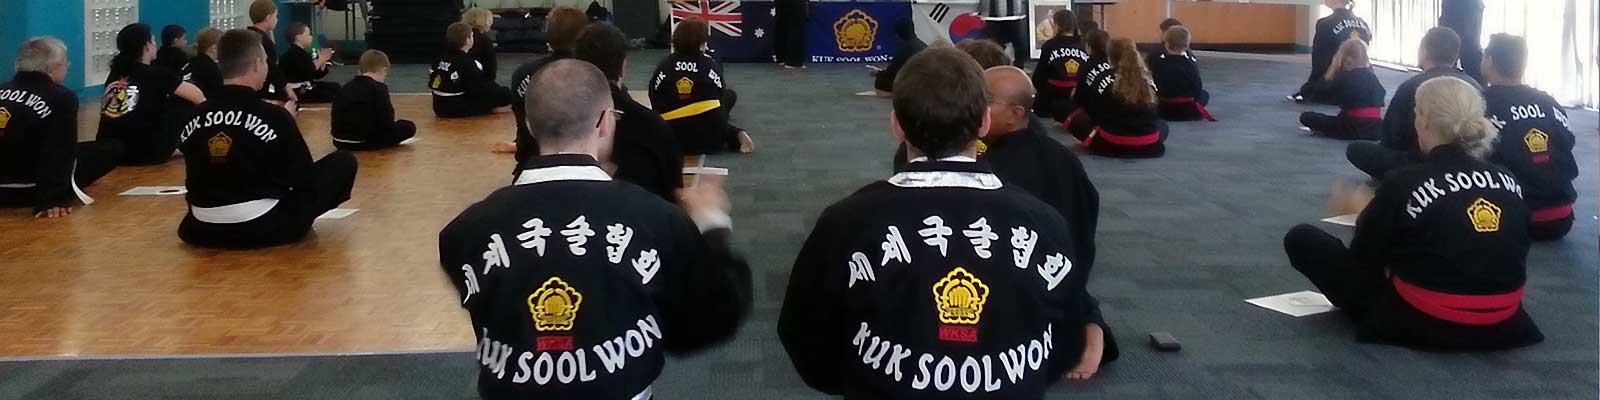 Seated group during KSW grading